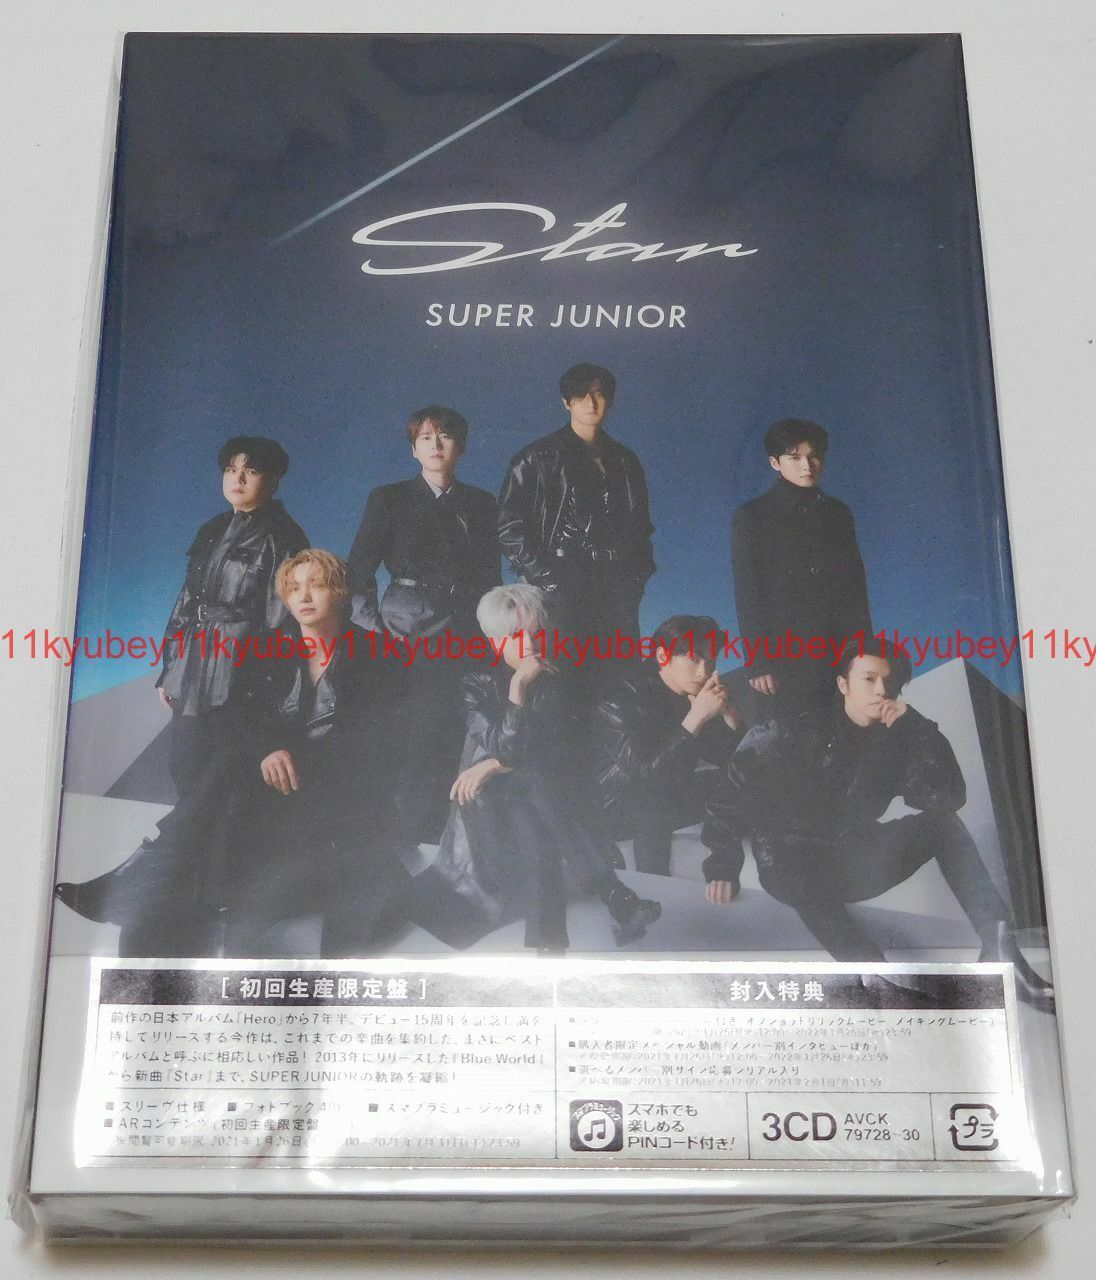 New SUPER JUNIOR Star First Limited Edition 3 CD Photobook 40P Japan AVCK-79728